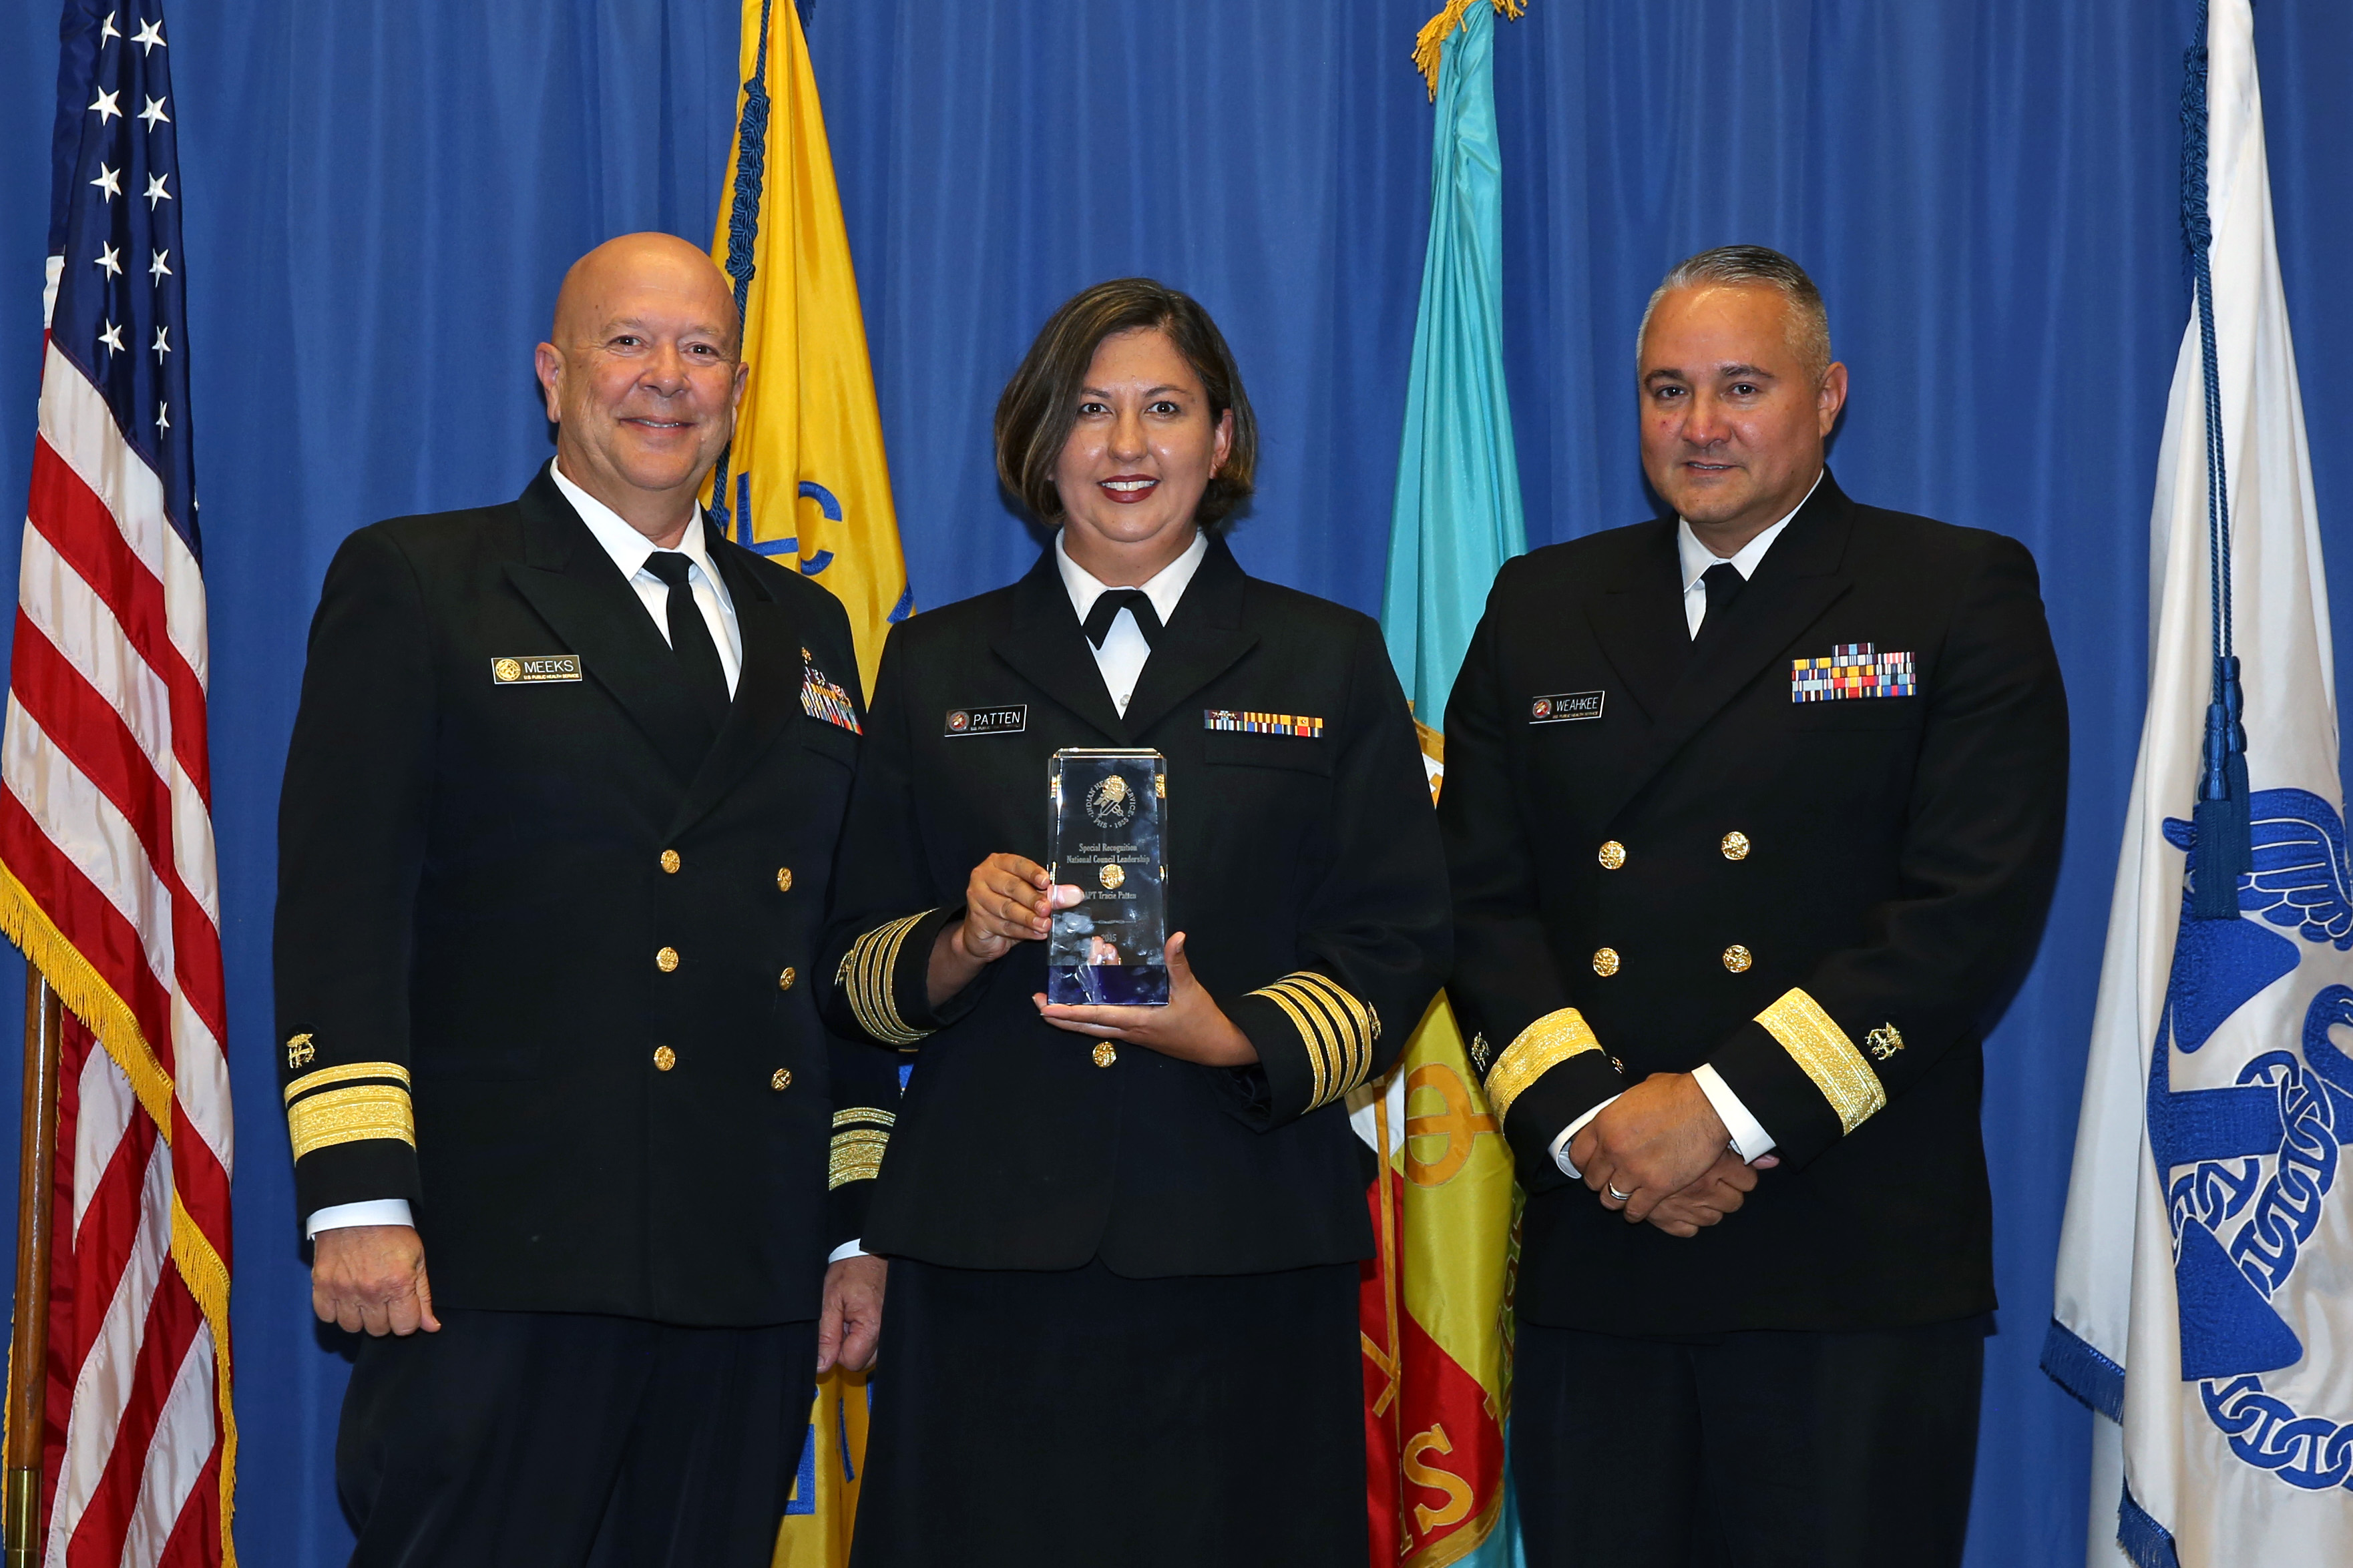 2015 Special Recognition National Council Leadership Award - CAPT Traci Patten, National Pharmacy Council (Oklahoma)